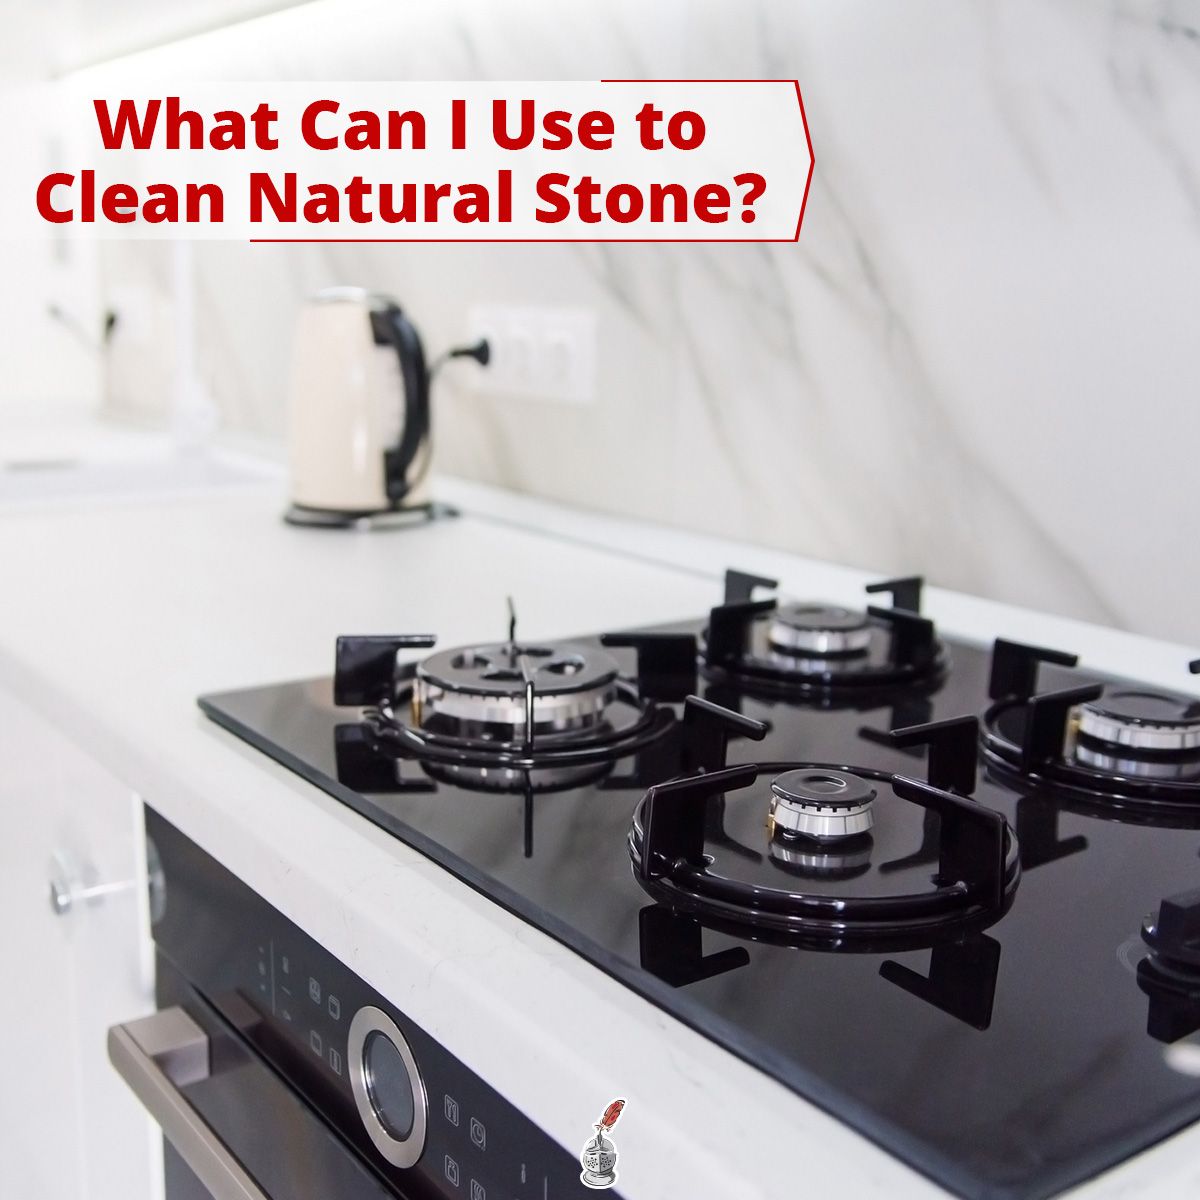 What Can I Use to Clean Natural Stone?